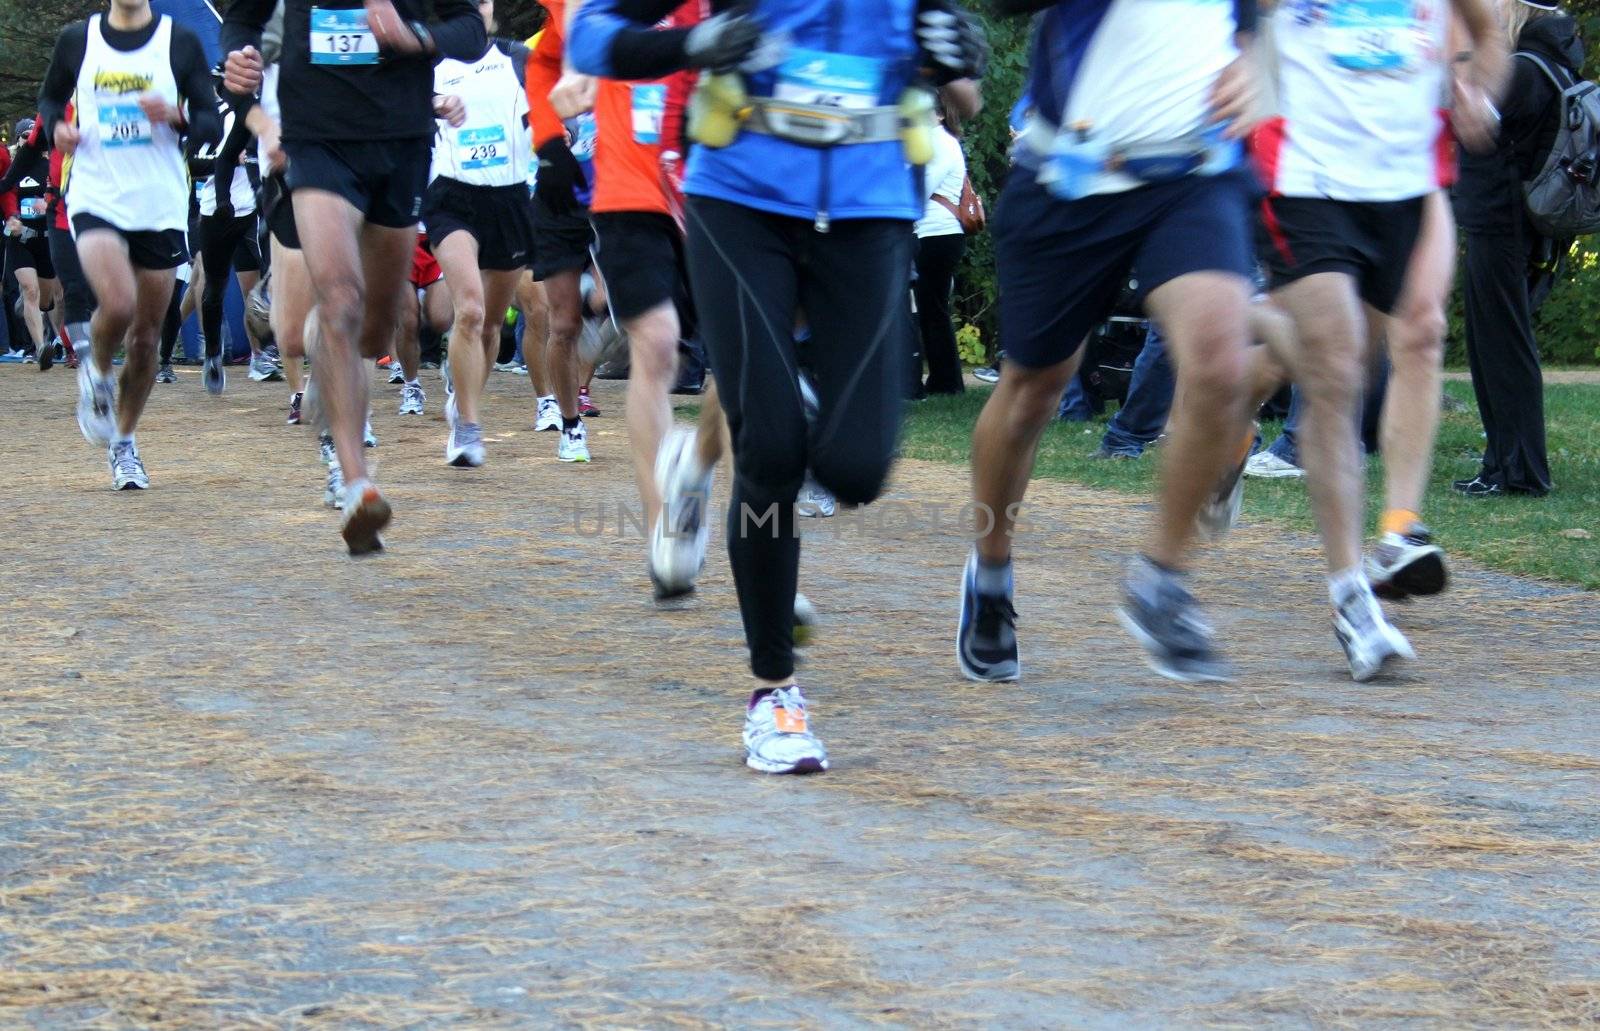 Joggers in a charity marathon